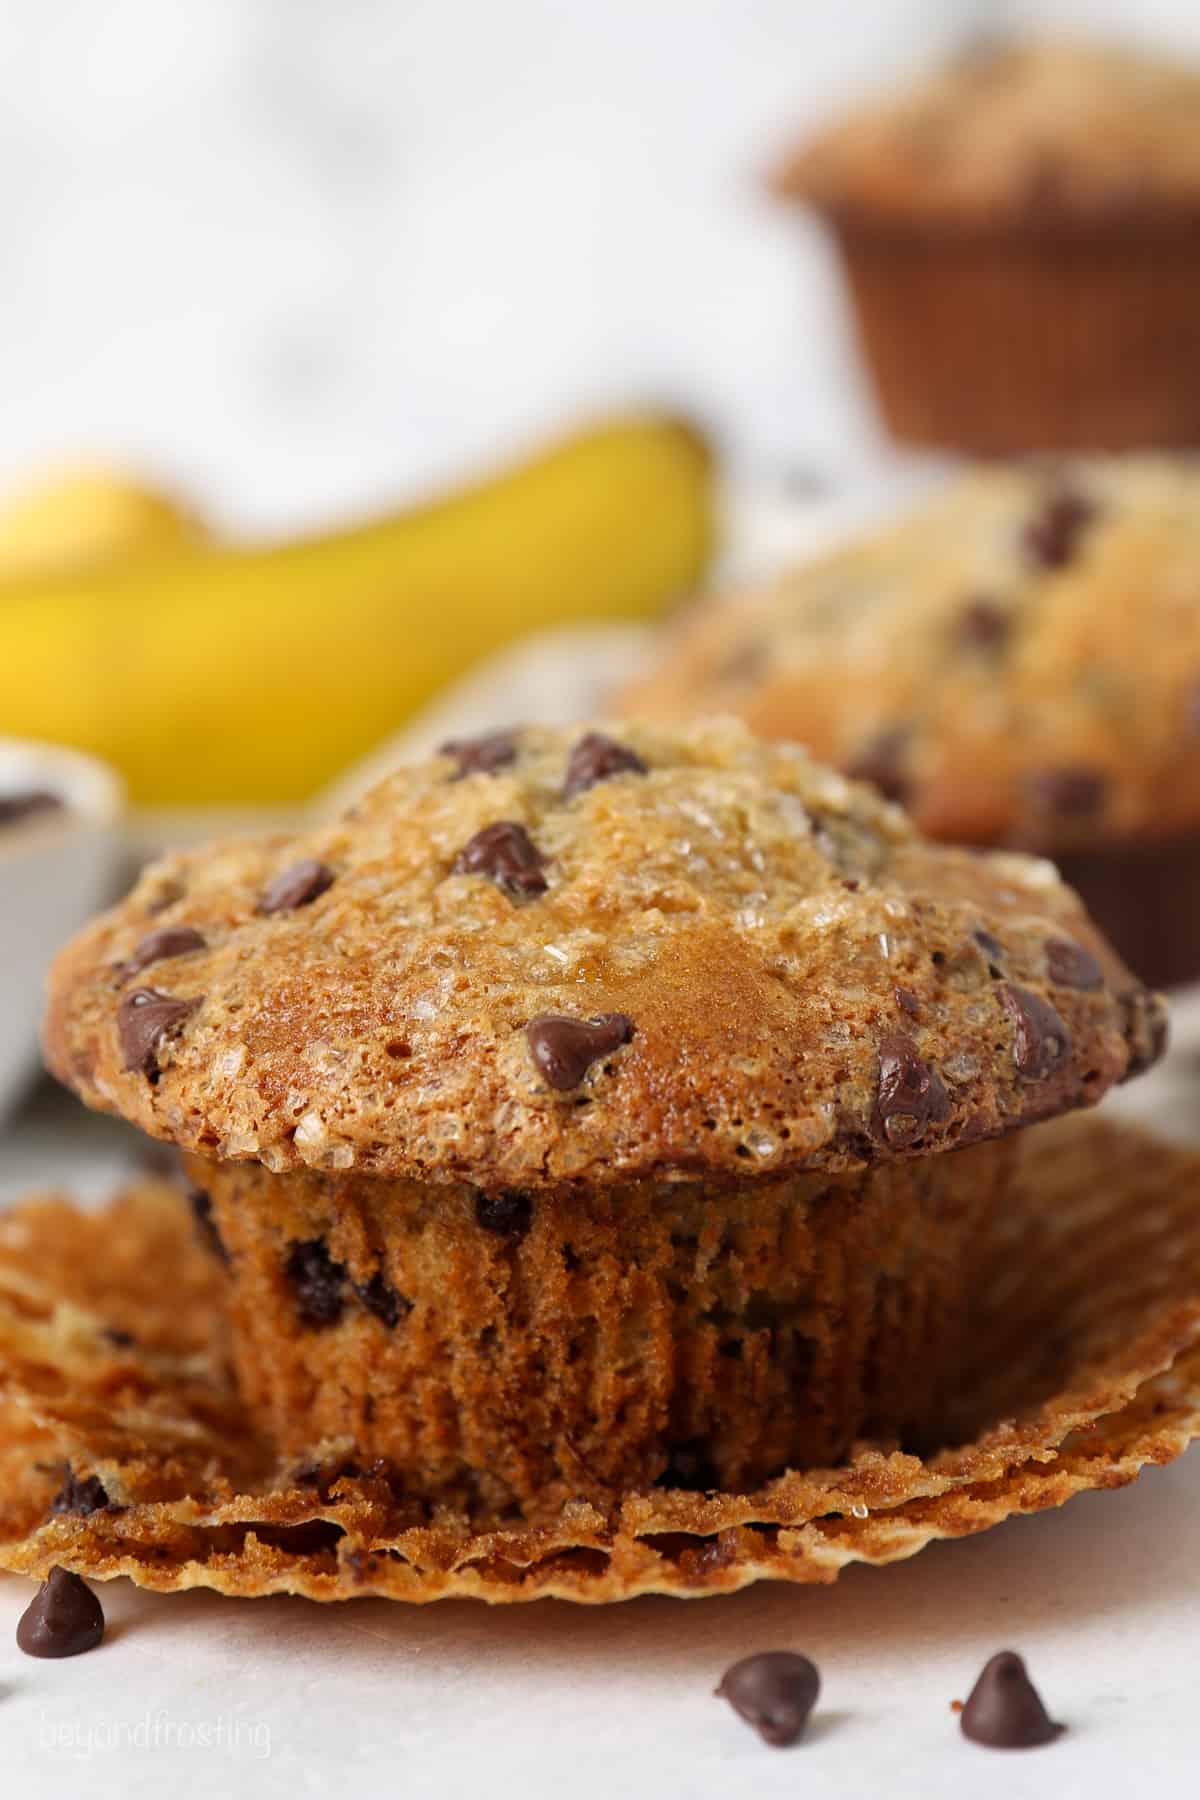 Close up of a partially unwrapped banana chocolate chip muffin.